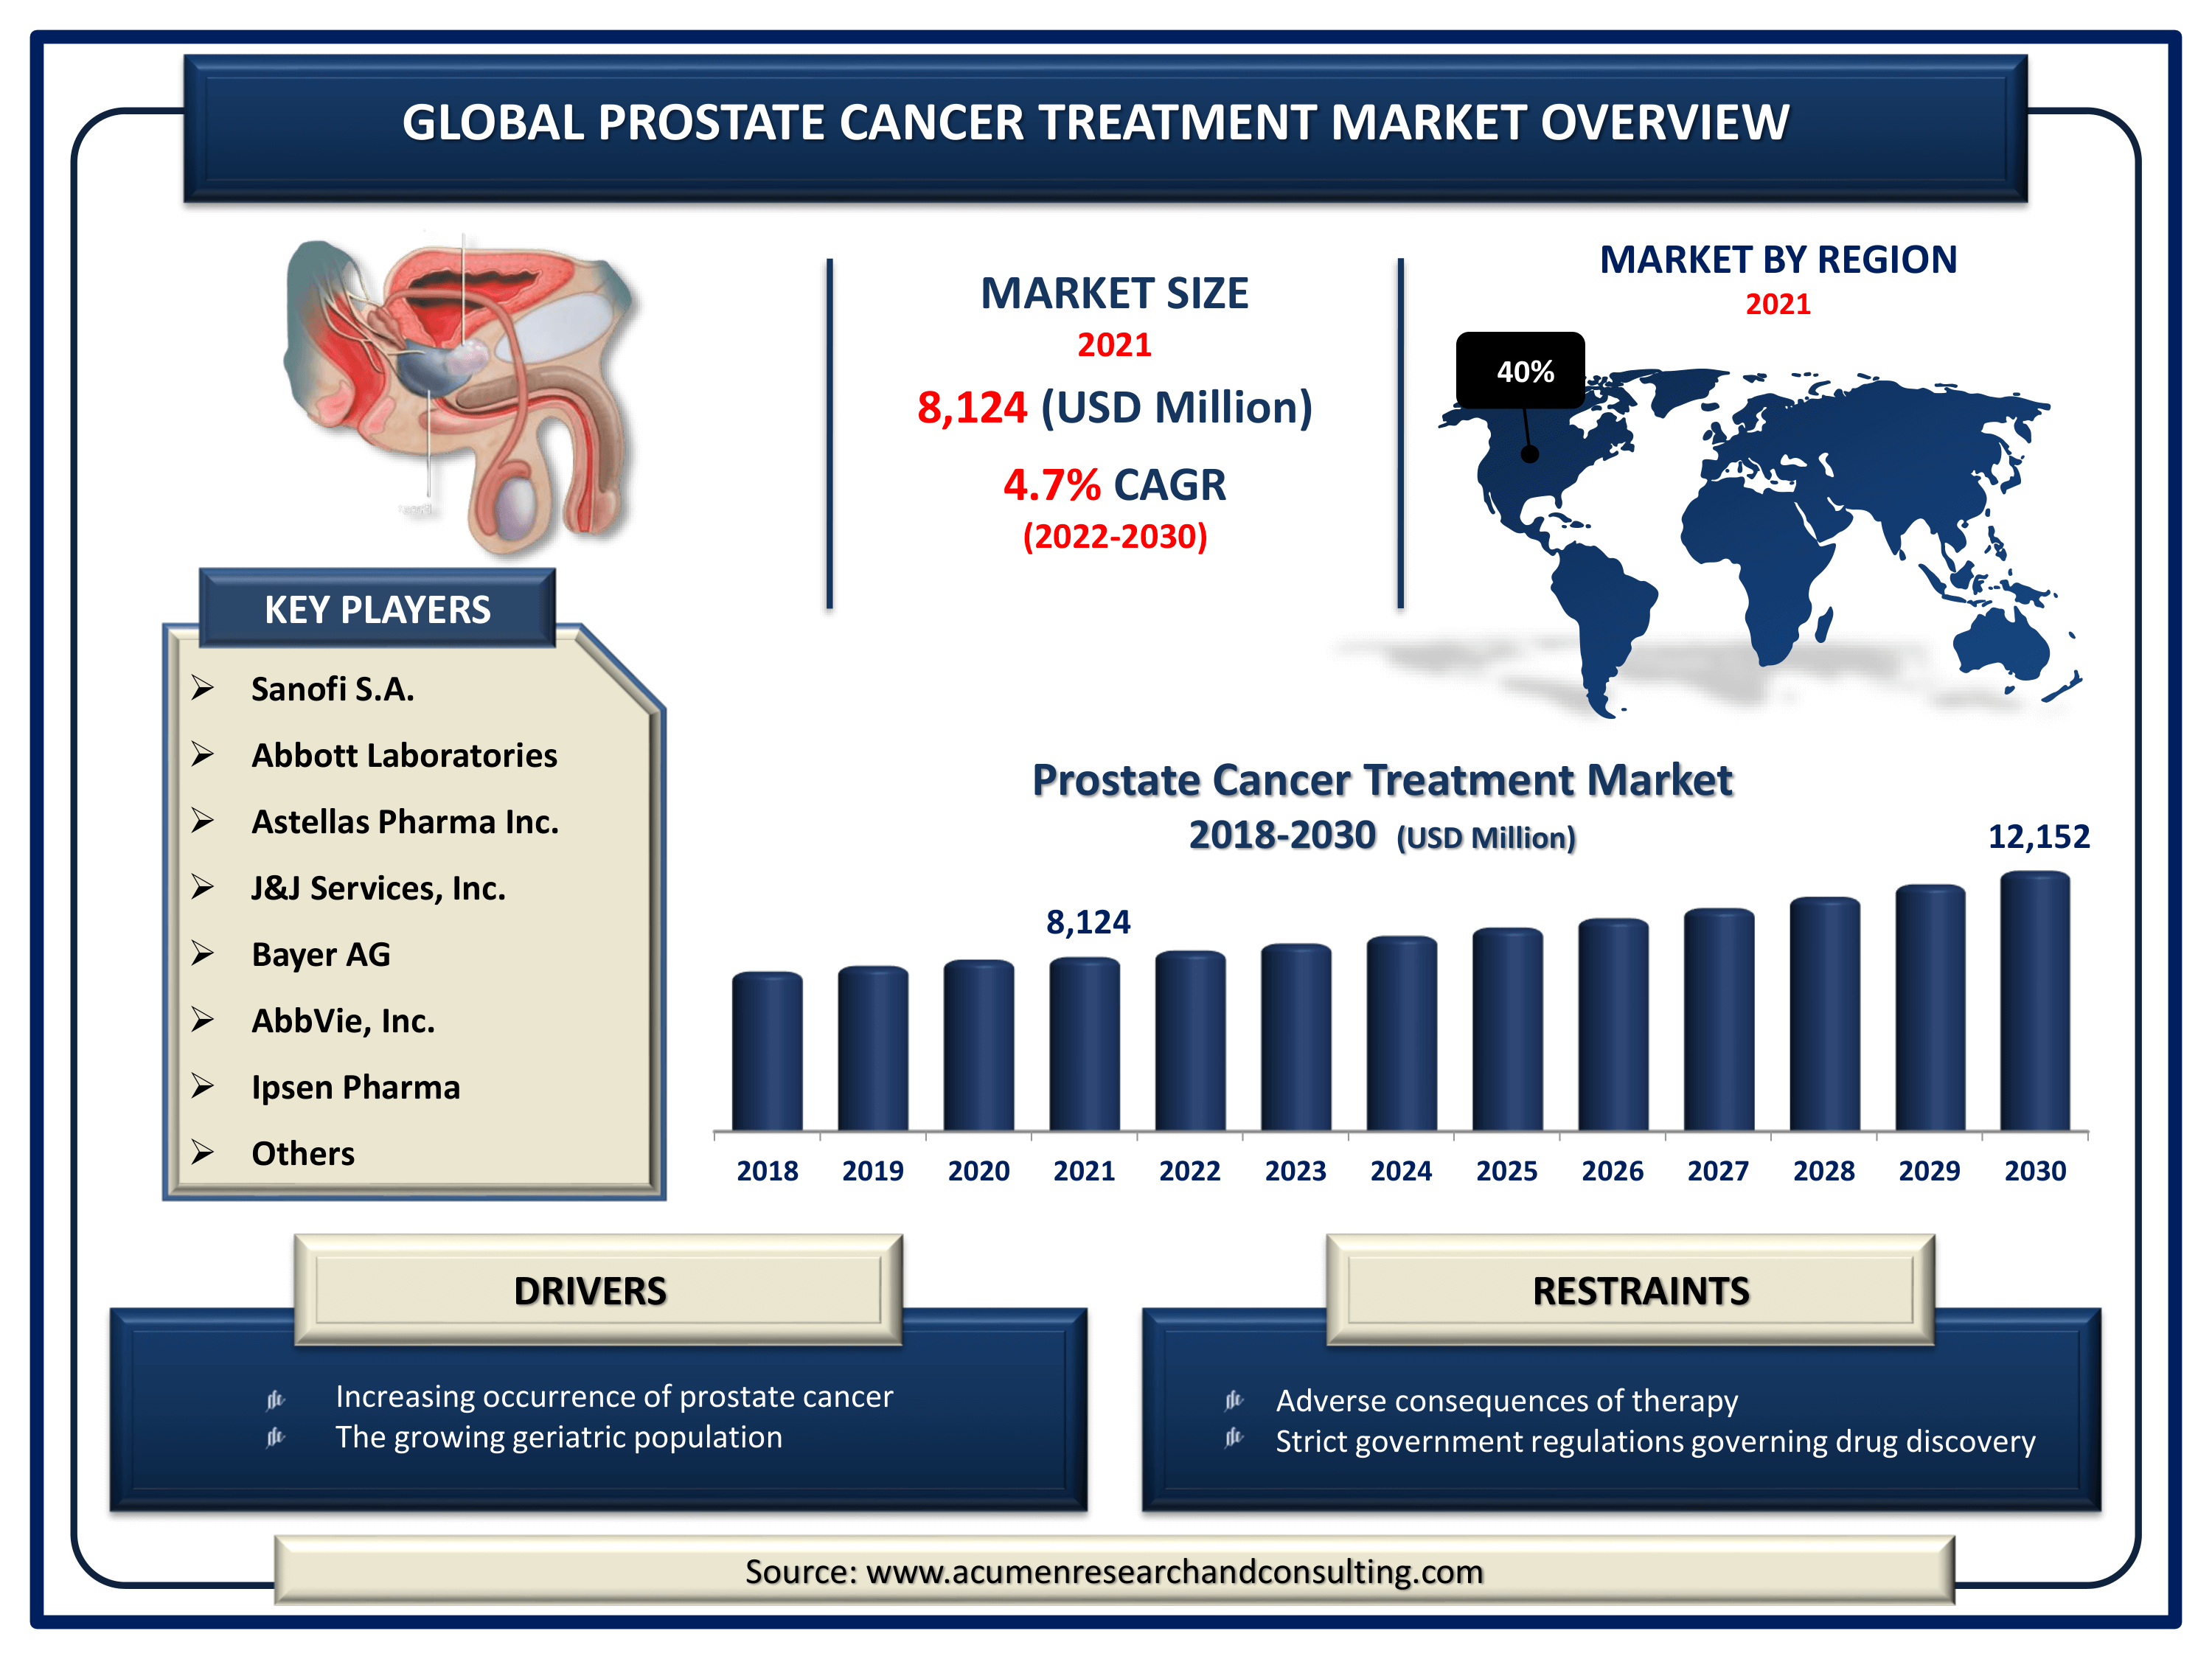 Global prostate cancer treatment market value is estimated to expand by USD 12,152 million by 2030, with a 4.7% CAGR from 2022 to 2030